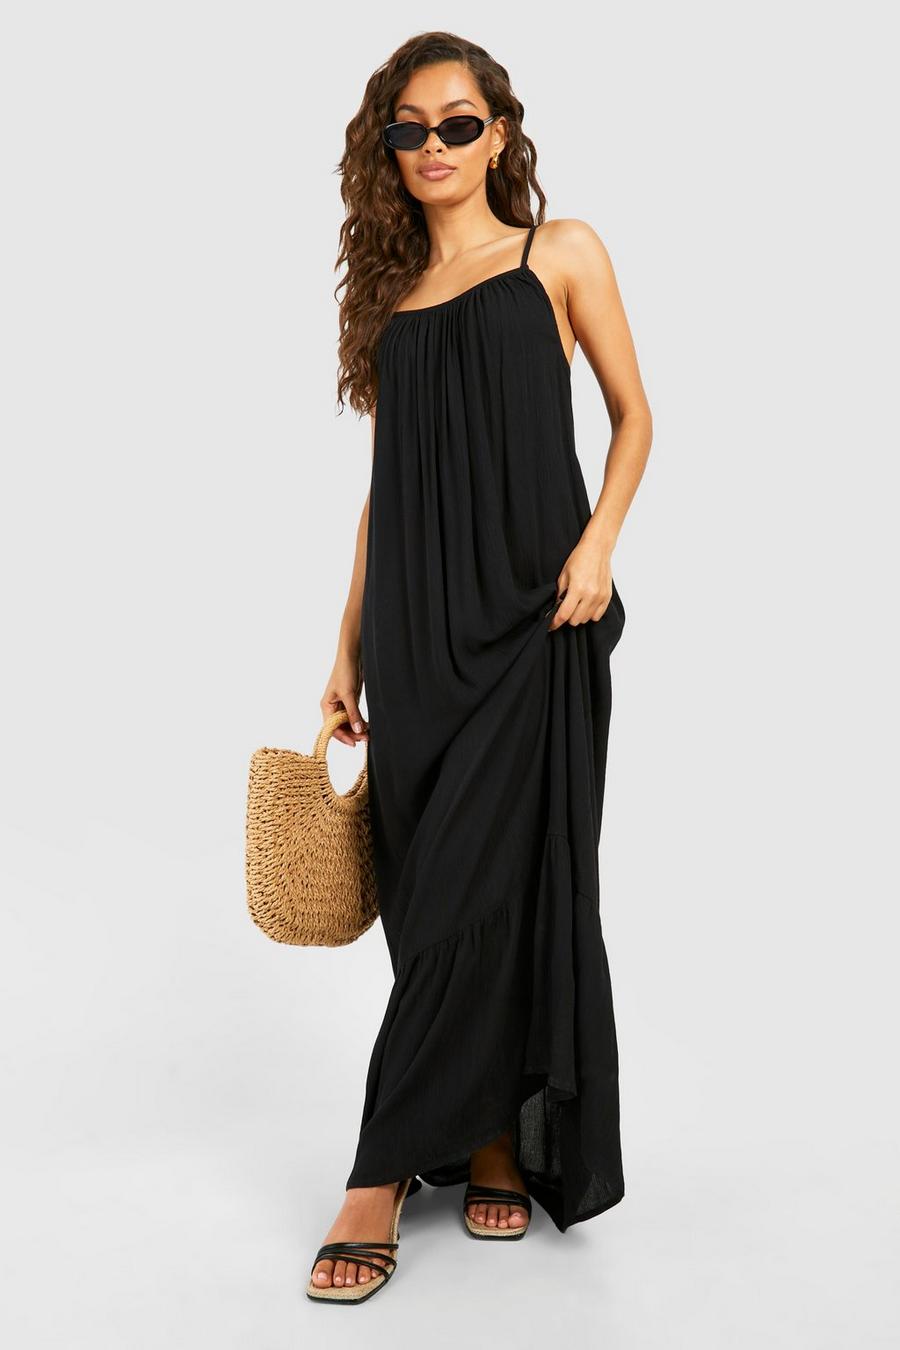 Black Strappy Cheesecloth Maxi Dress